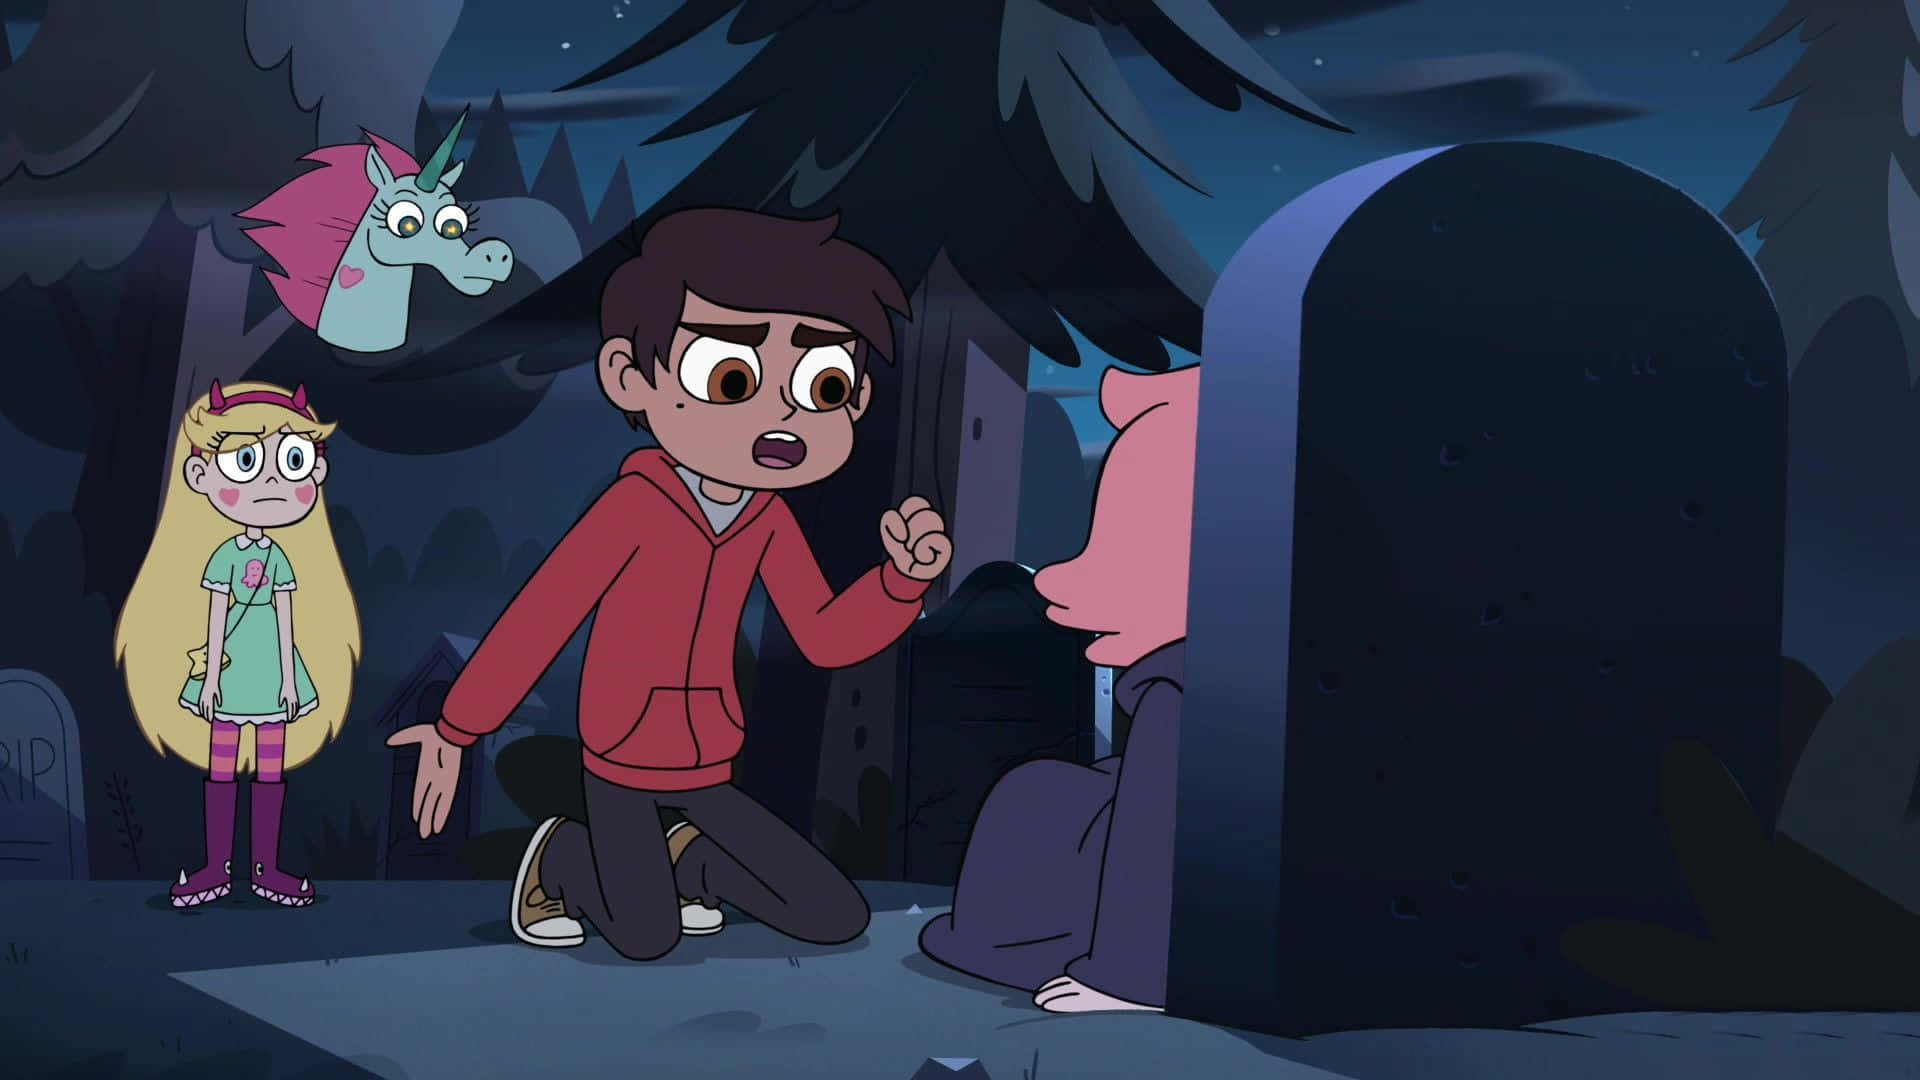 Star Butterfly and Marco Diaz in the magical world of Mewni